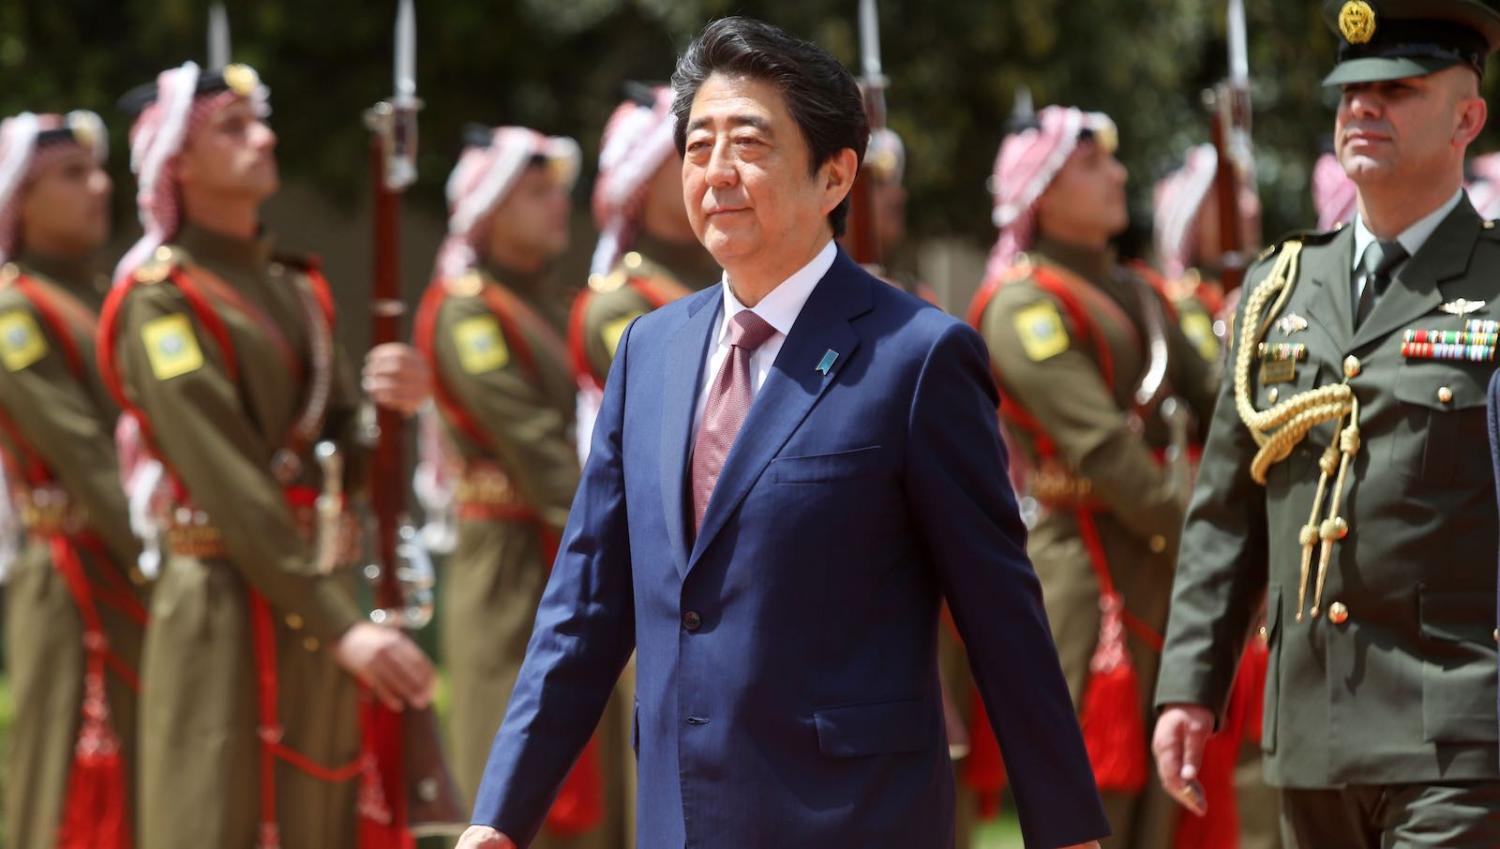 Japanese Prime Minister Shinzo Abe during a two-day visit to Jordan in May (Photo: Salah Malkawi/Getty)